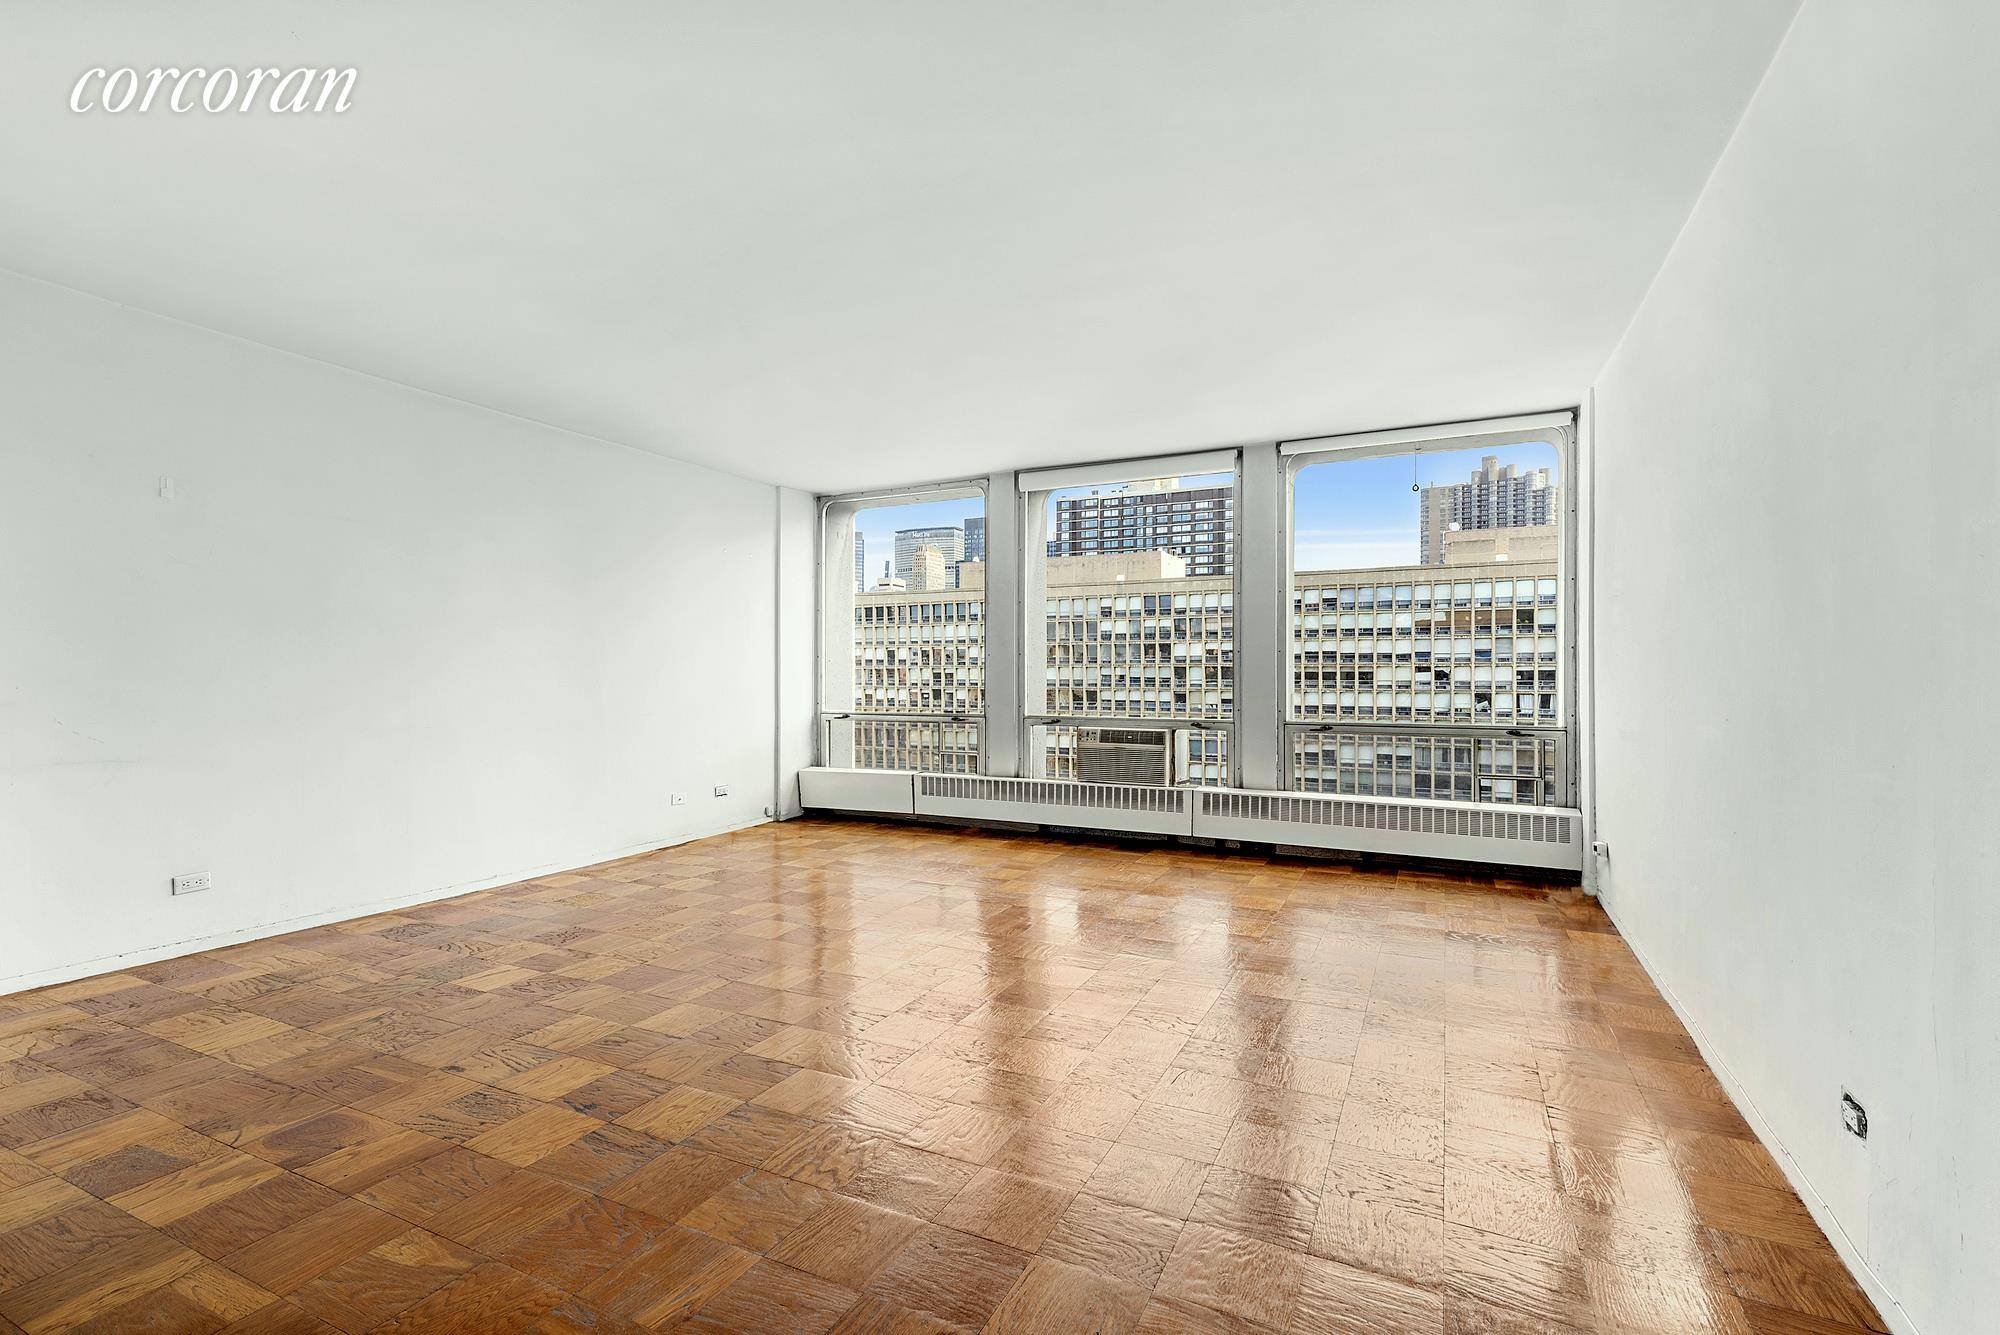 Large sunny 1 bedroom condo in Kips Bay Towers features open kitchen with dishwasher, floor to ceiling windows, walk in closet, refinished floors.